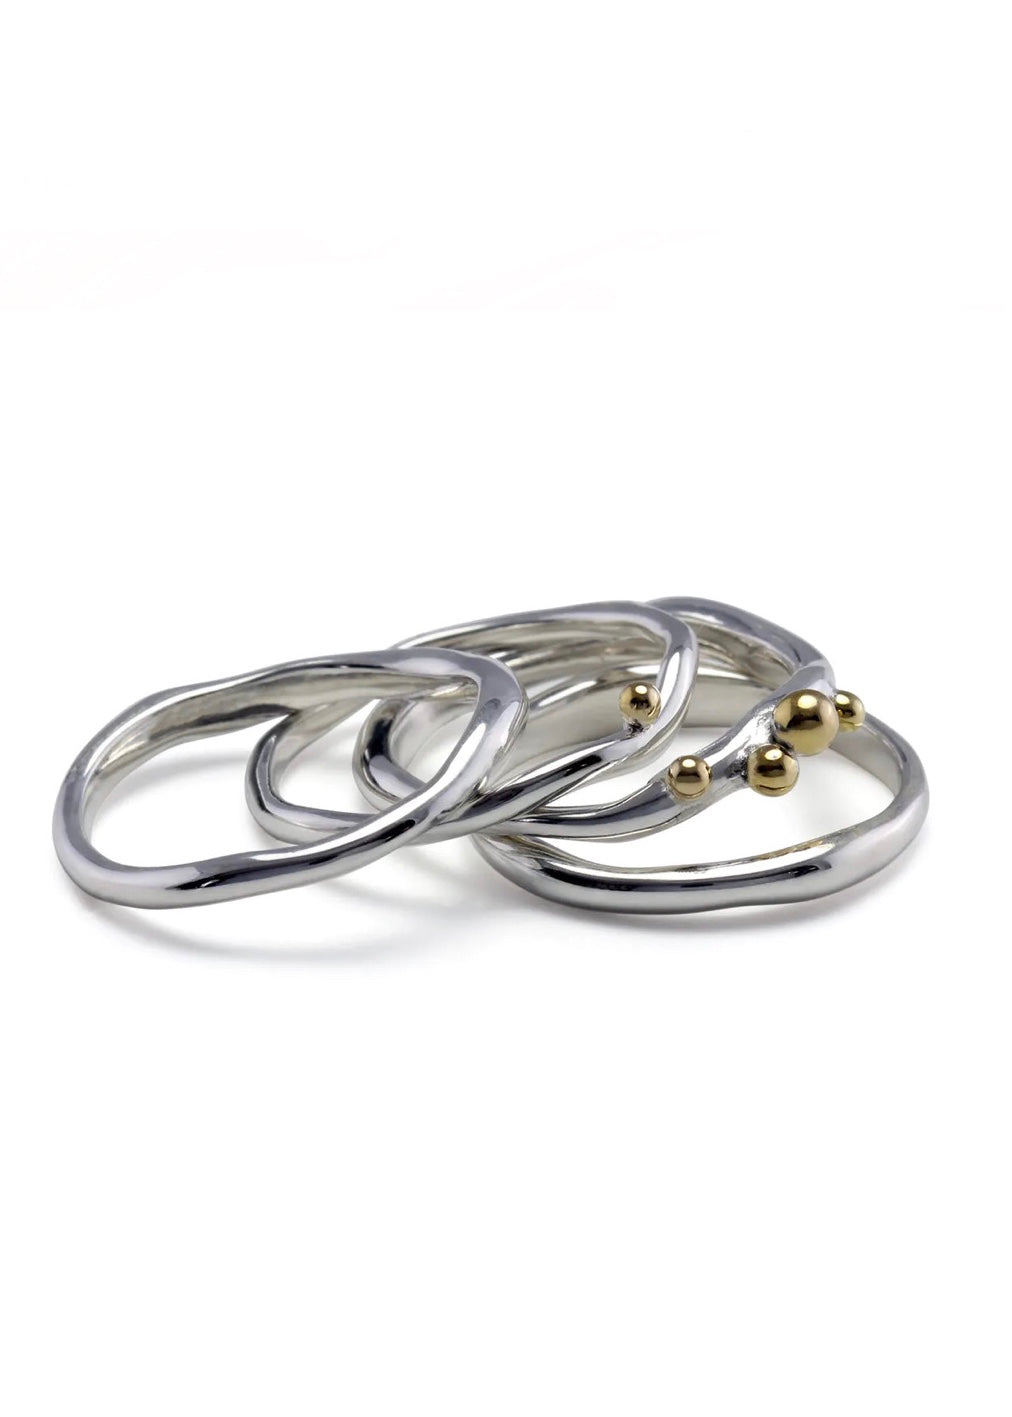 Banyan Silver Stacking Silver Rings with Brass Details*